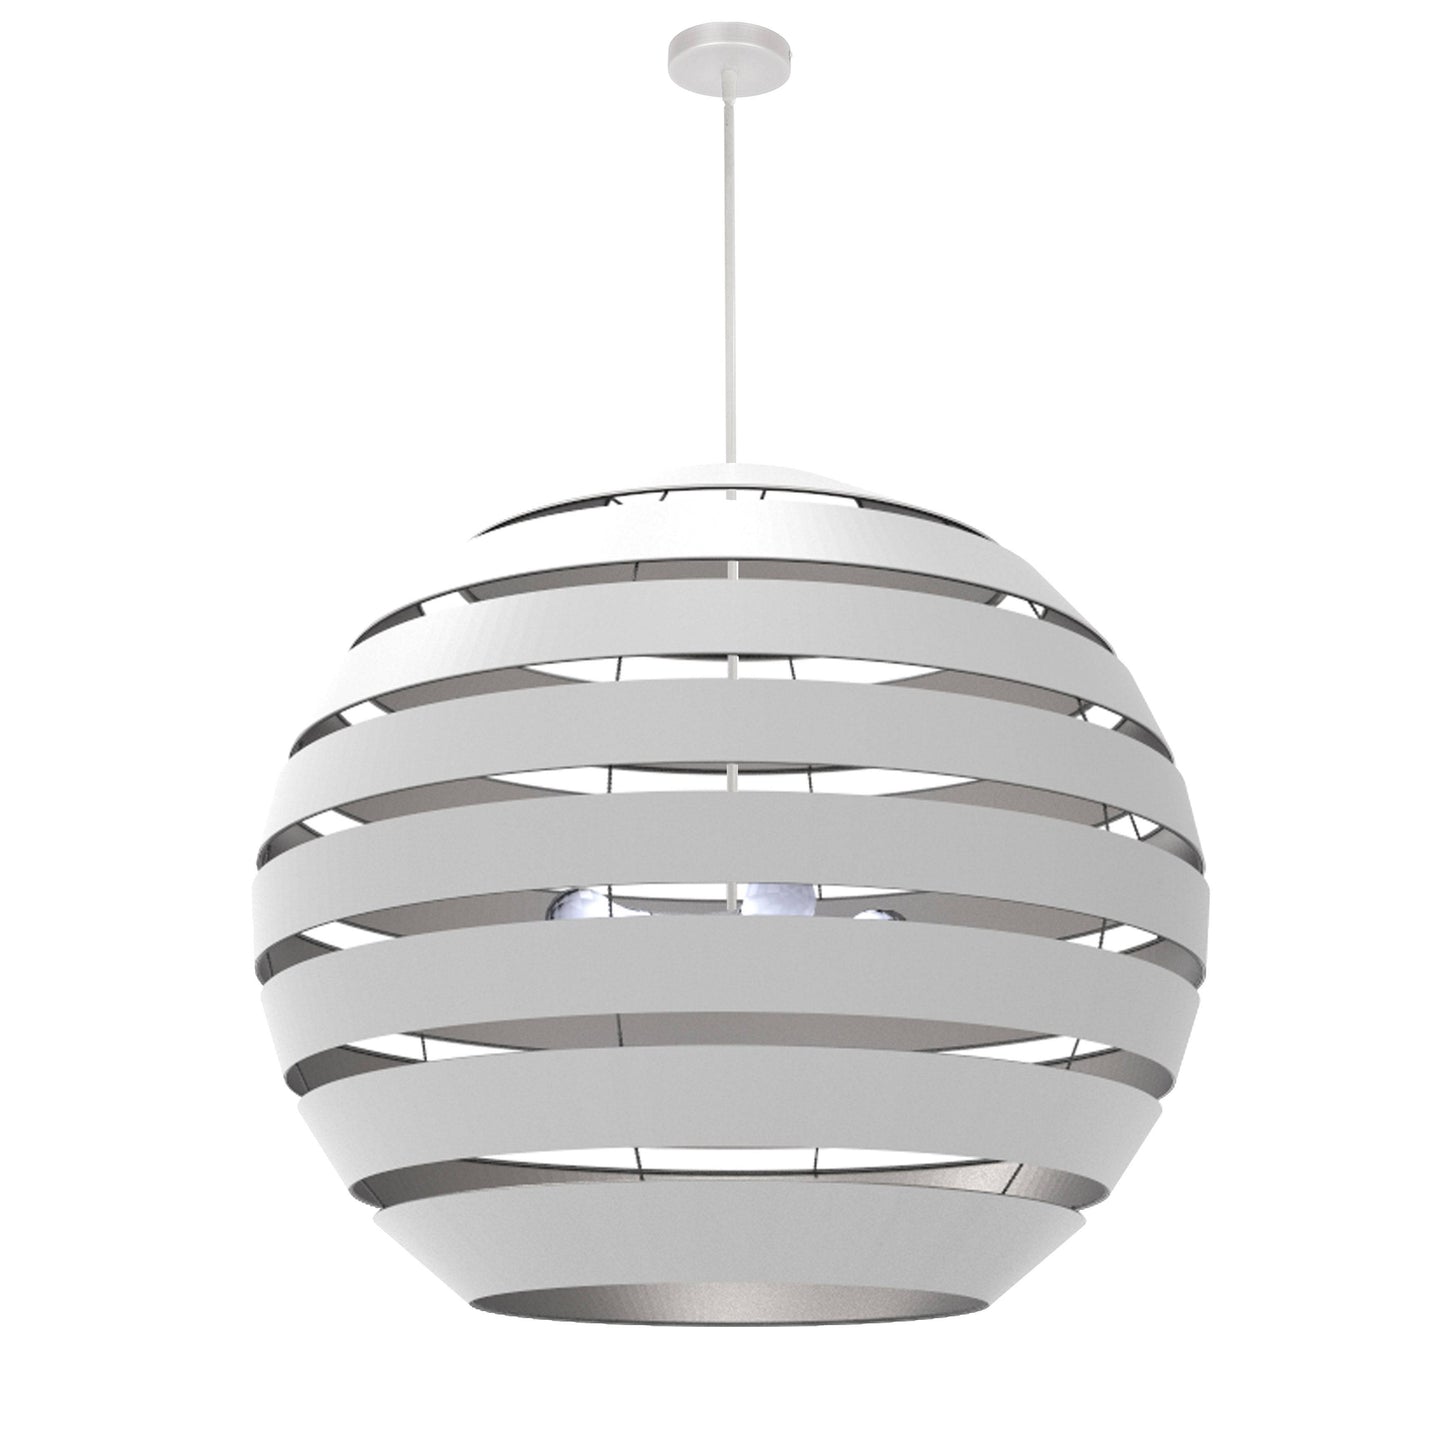 Dainolite Hula 4 Light 30 in Matte White Incandescent Chandelier with White and Silver Shade